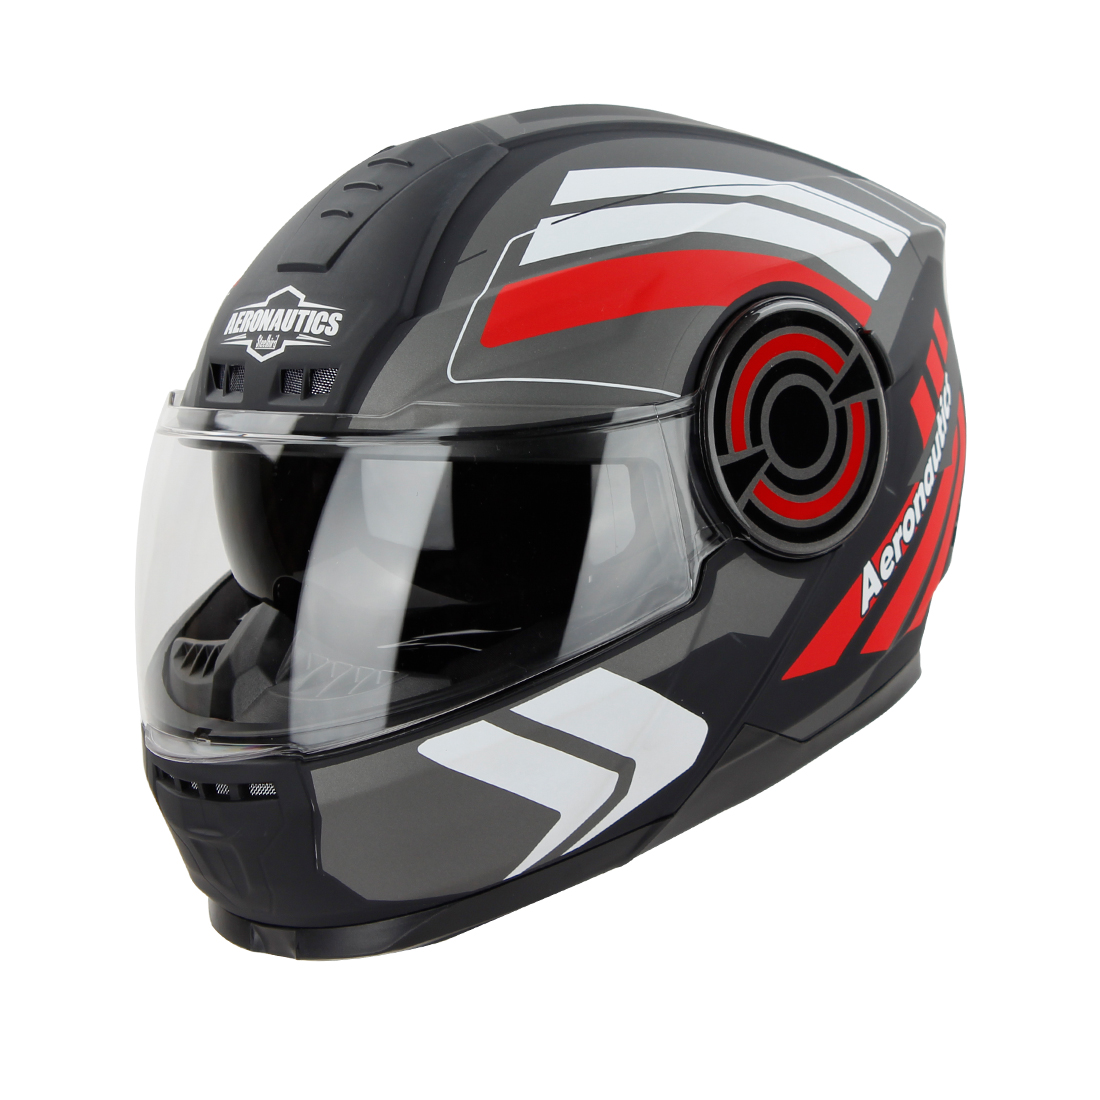 Steelbird SBH-40 Vanguard ISI Certified Full Face Graphic Helmet For Men And Women With Inner Sun Shield (Glossy Black Red)